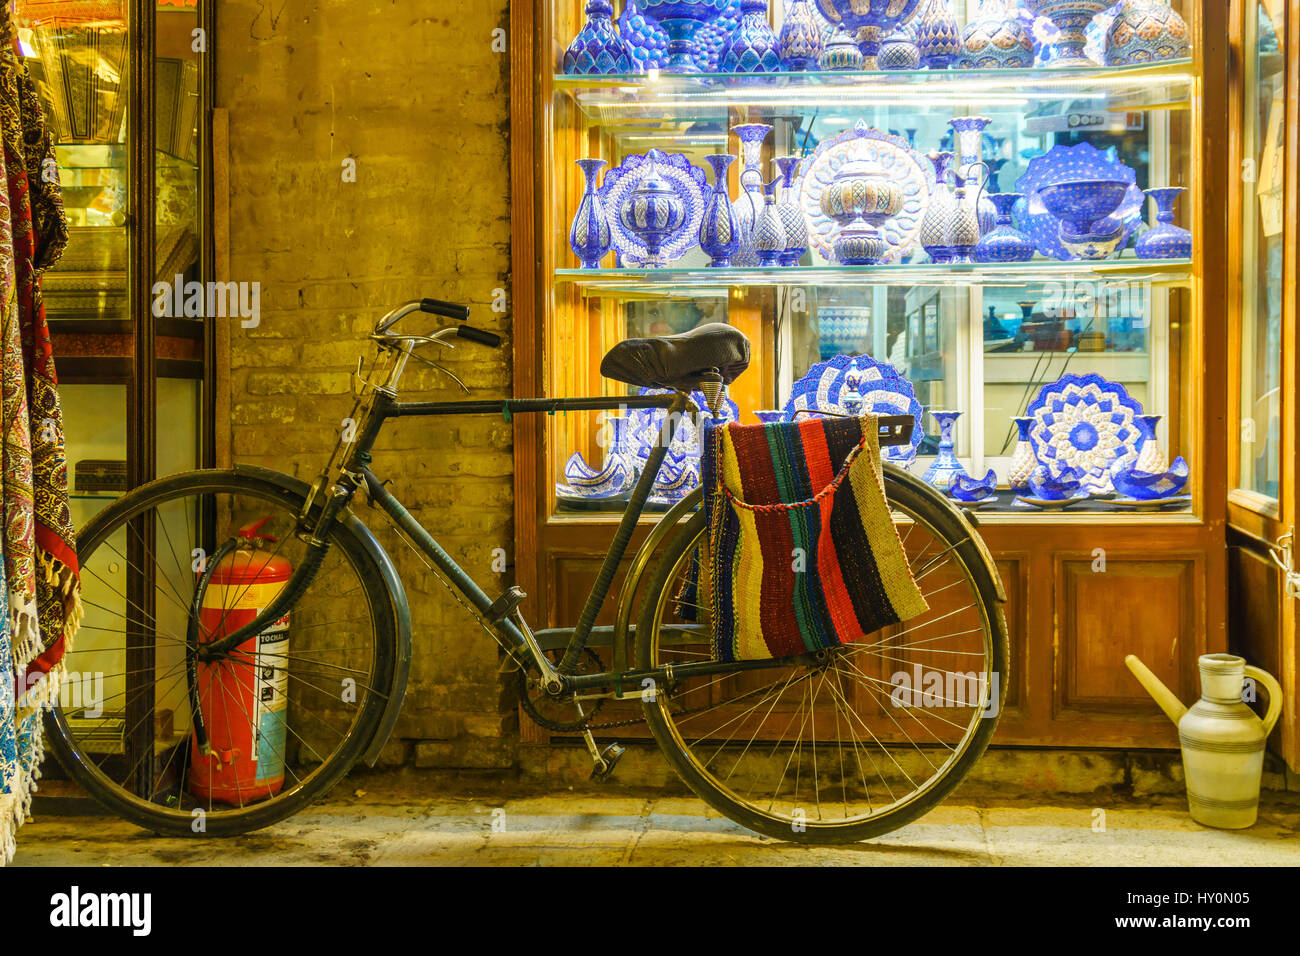 handicraft at bazaar of isfahan with bike an pottery Stock Photo